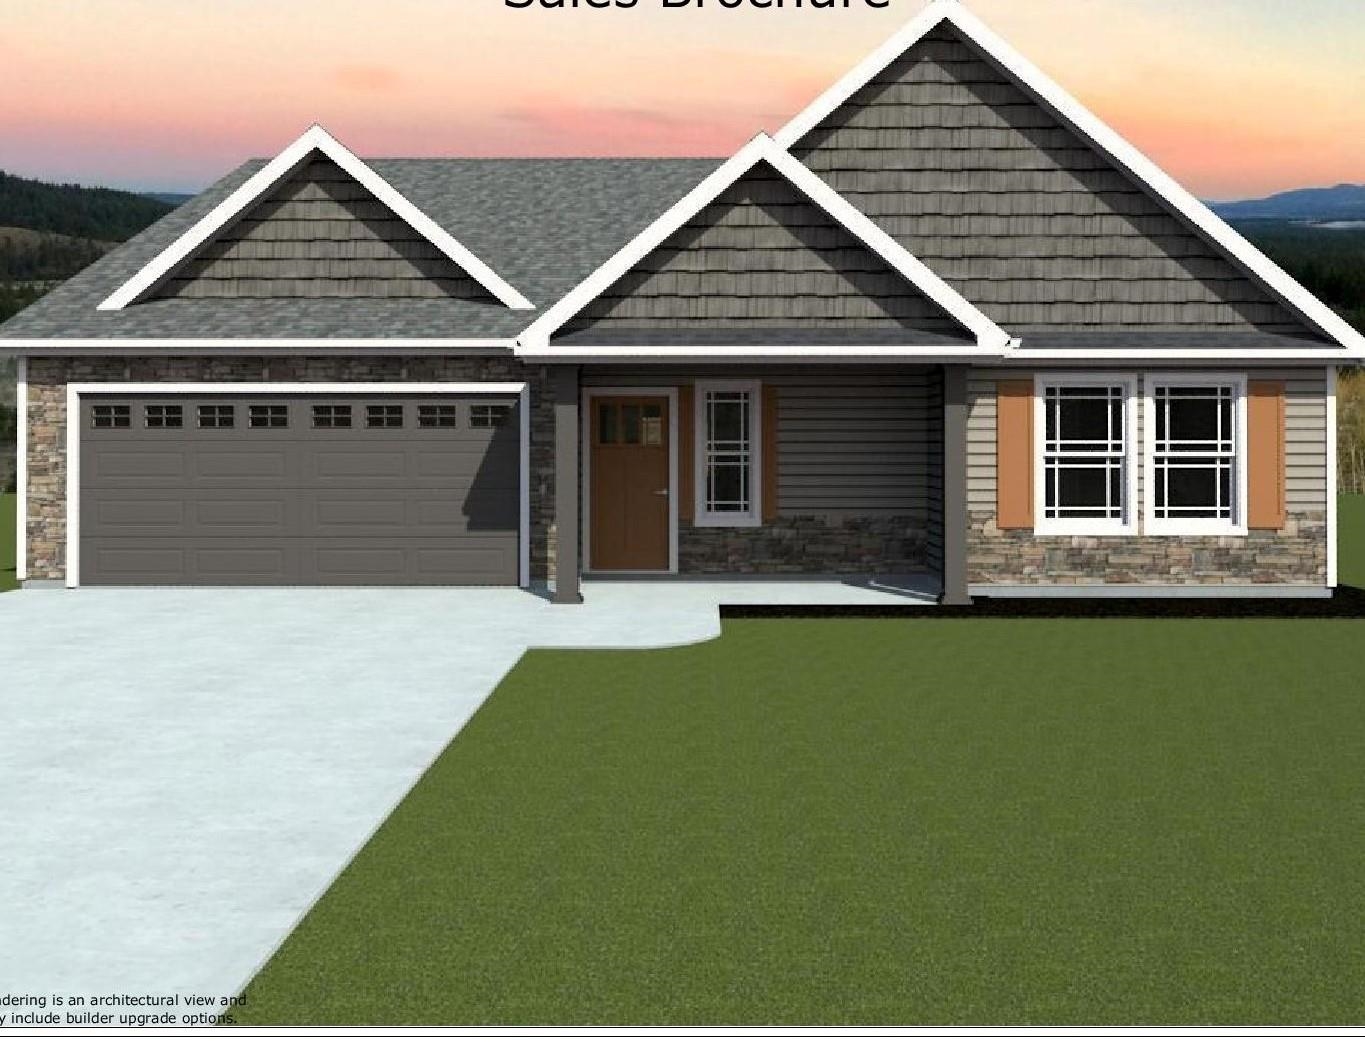 This is the FRANKLIN floorplan with 3 bedrooms, 2 bathrooms, and an office/study. Standard features to this home and the community include Crown Molding with Rope Lighting, Trey ceiling in Master Bedroom, Gas Fireplace.